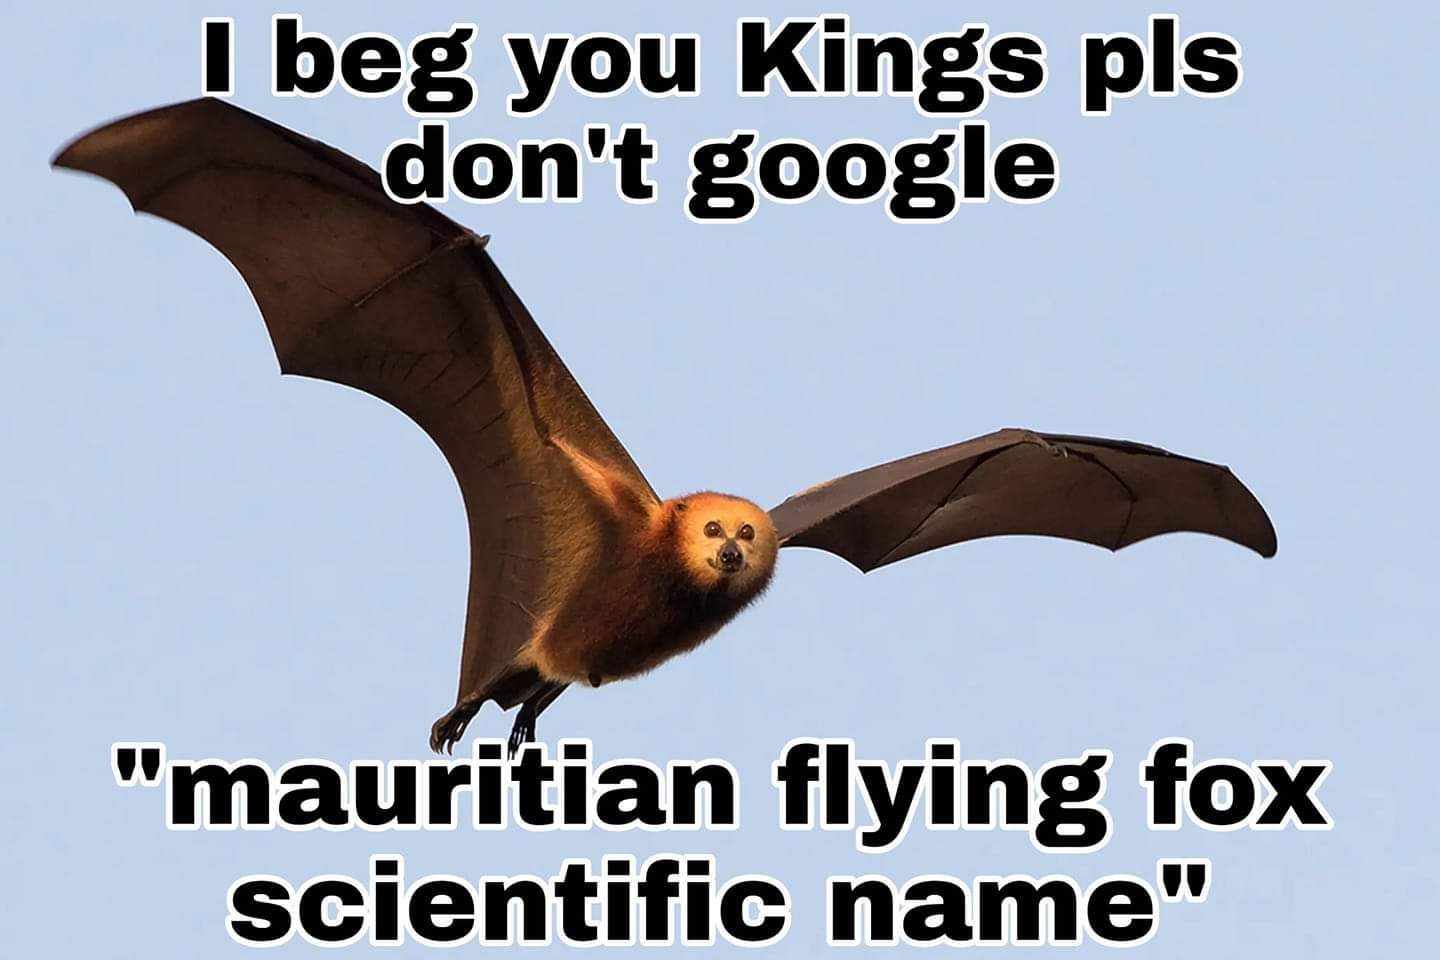 I don't give a flying fox